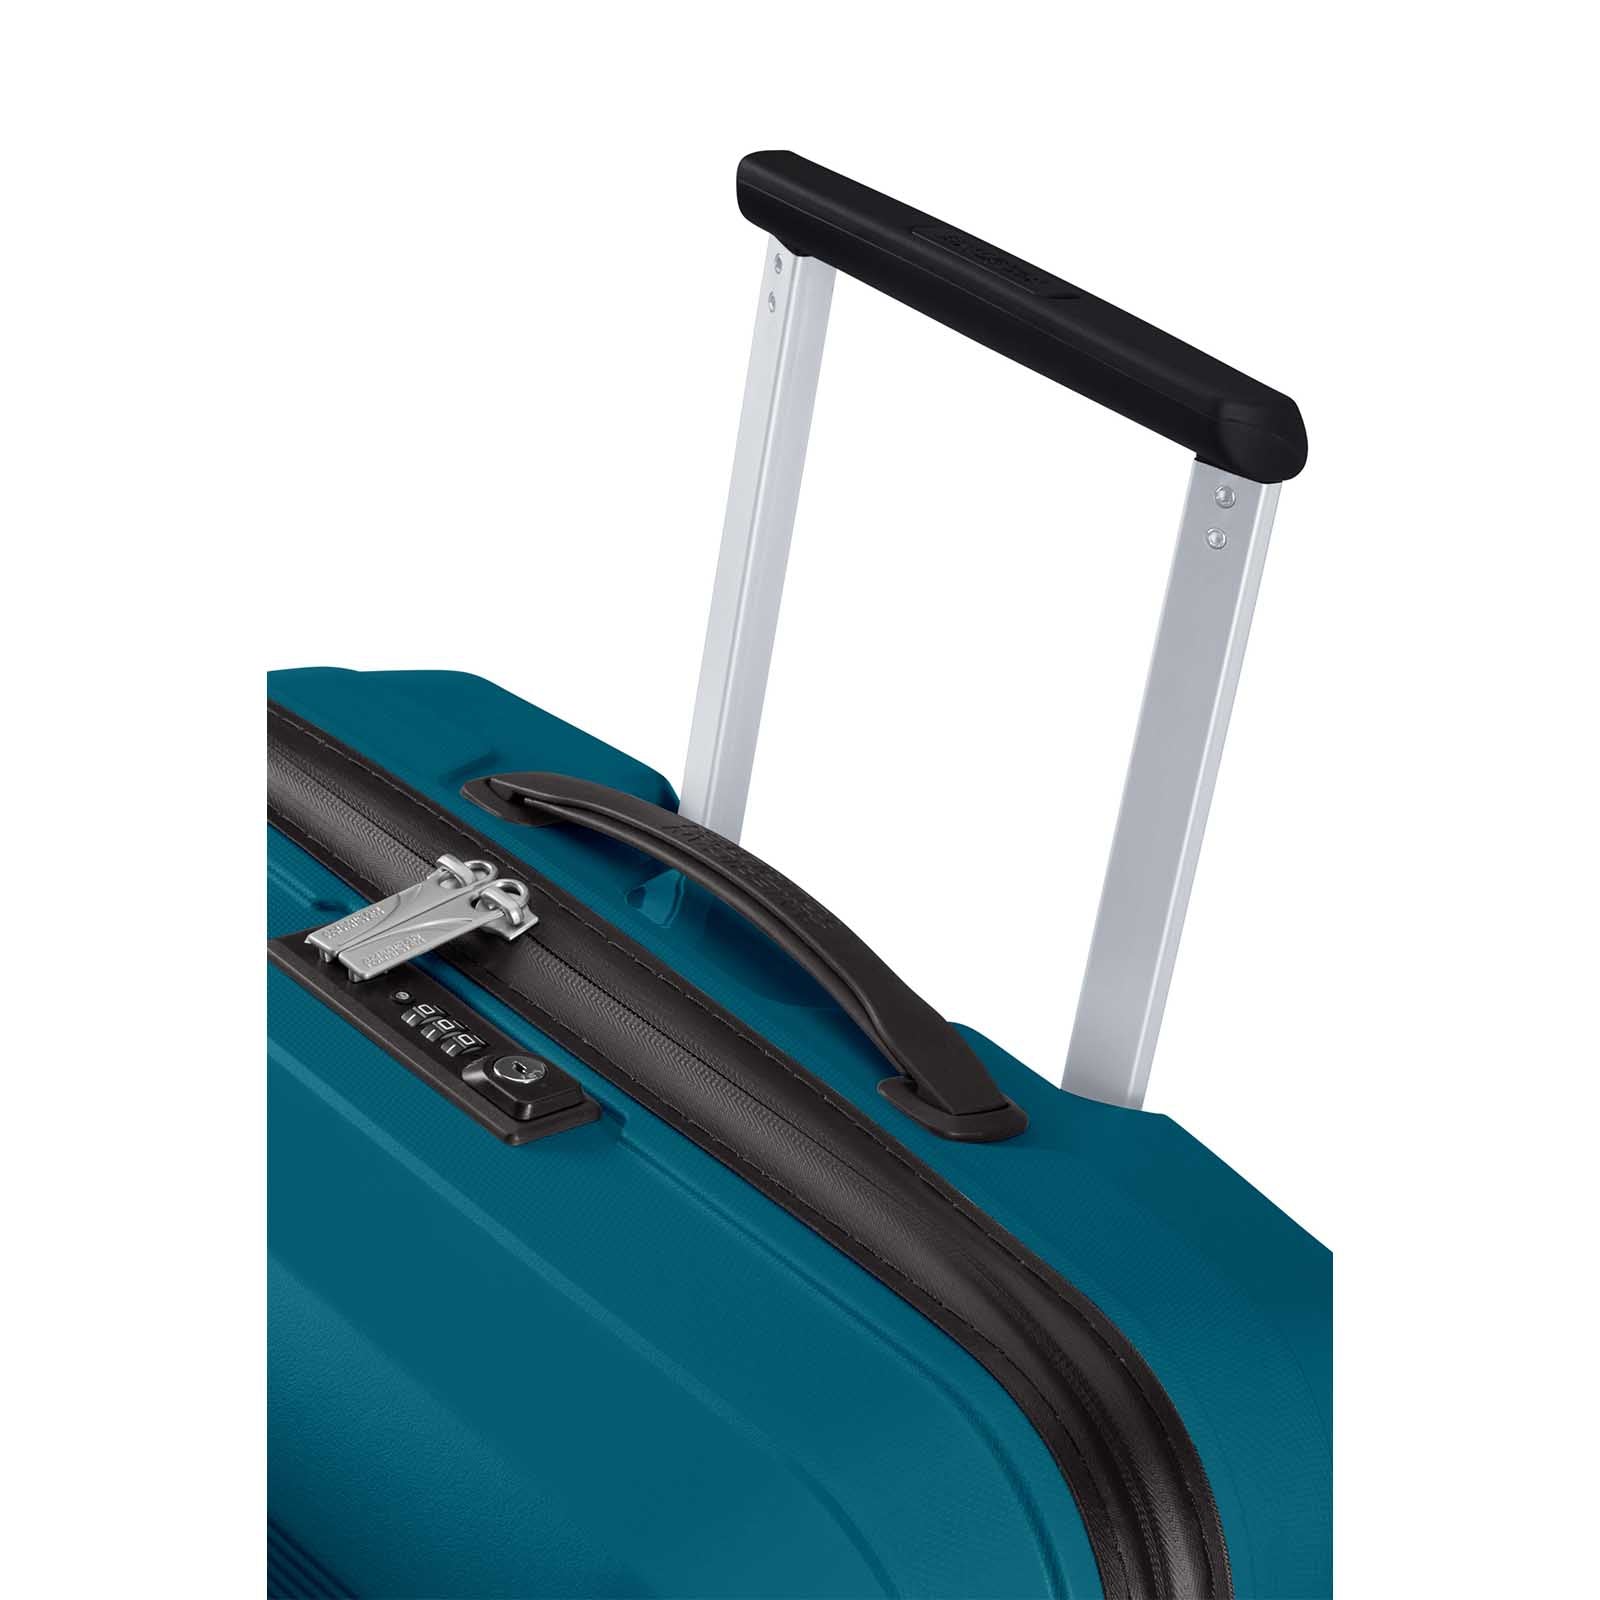 American-Tourister-Airconic-67cm-Suitcase-Deep-Ocean-Trolley